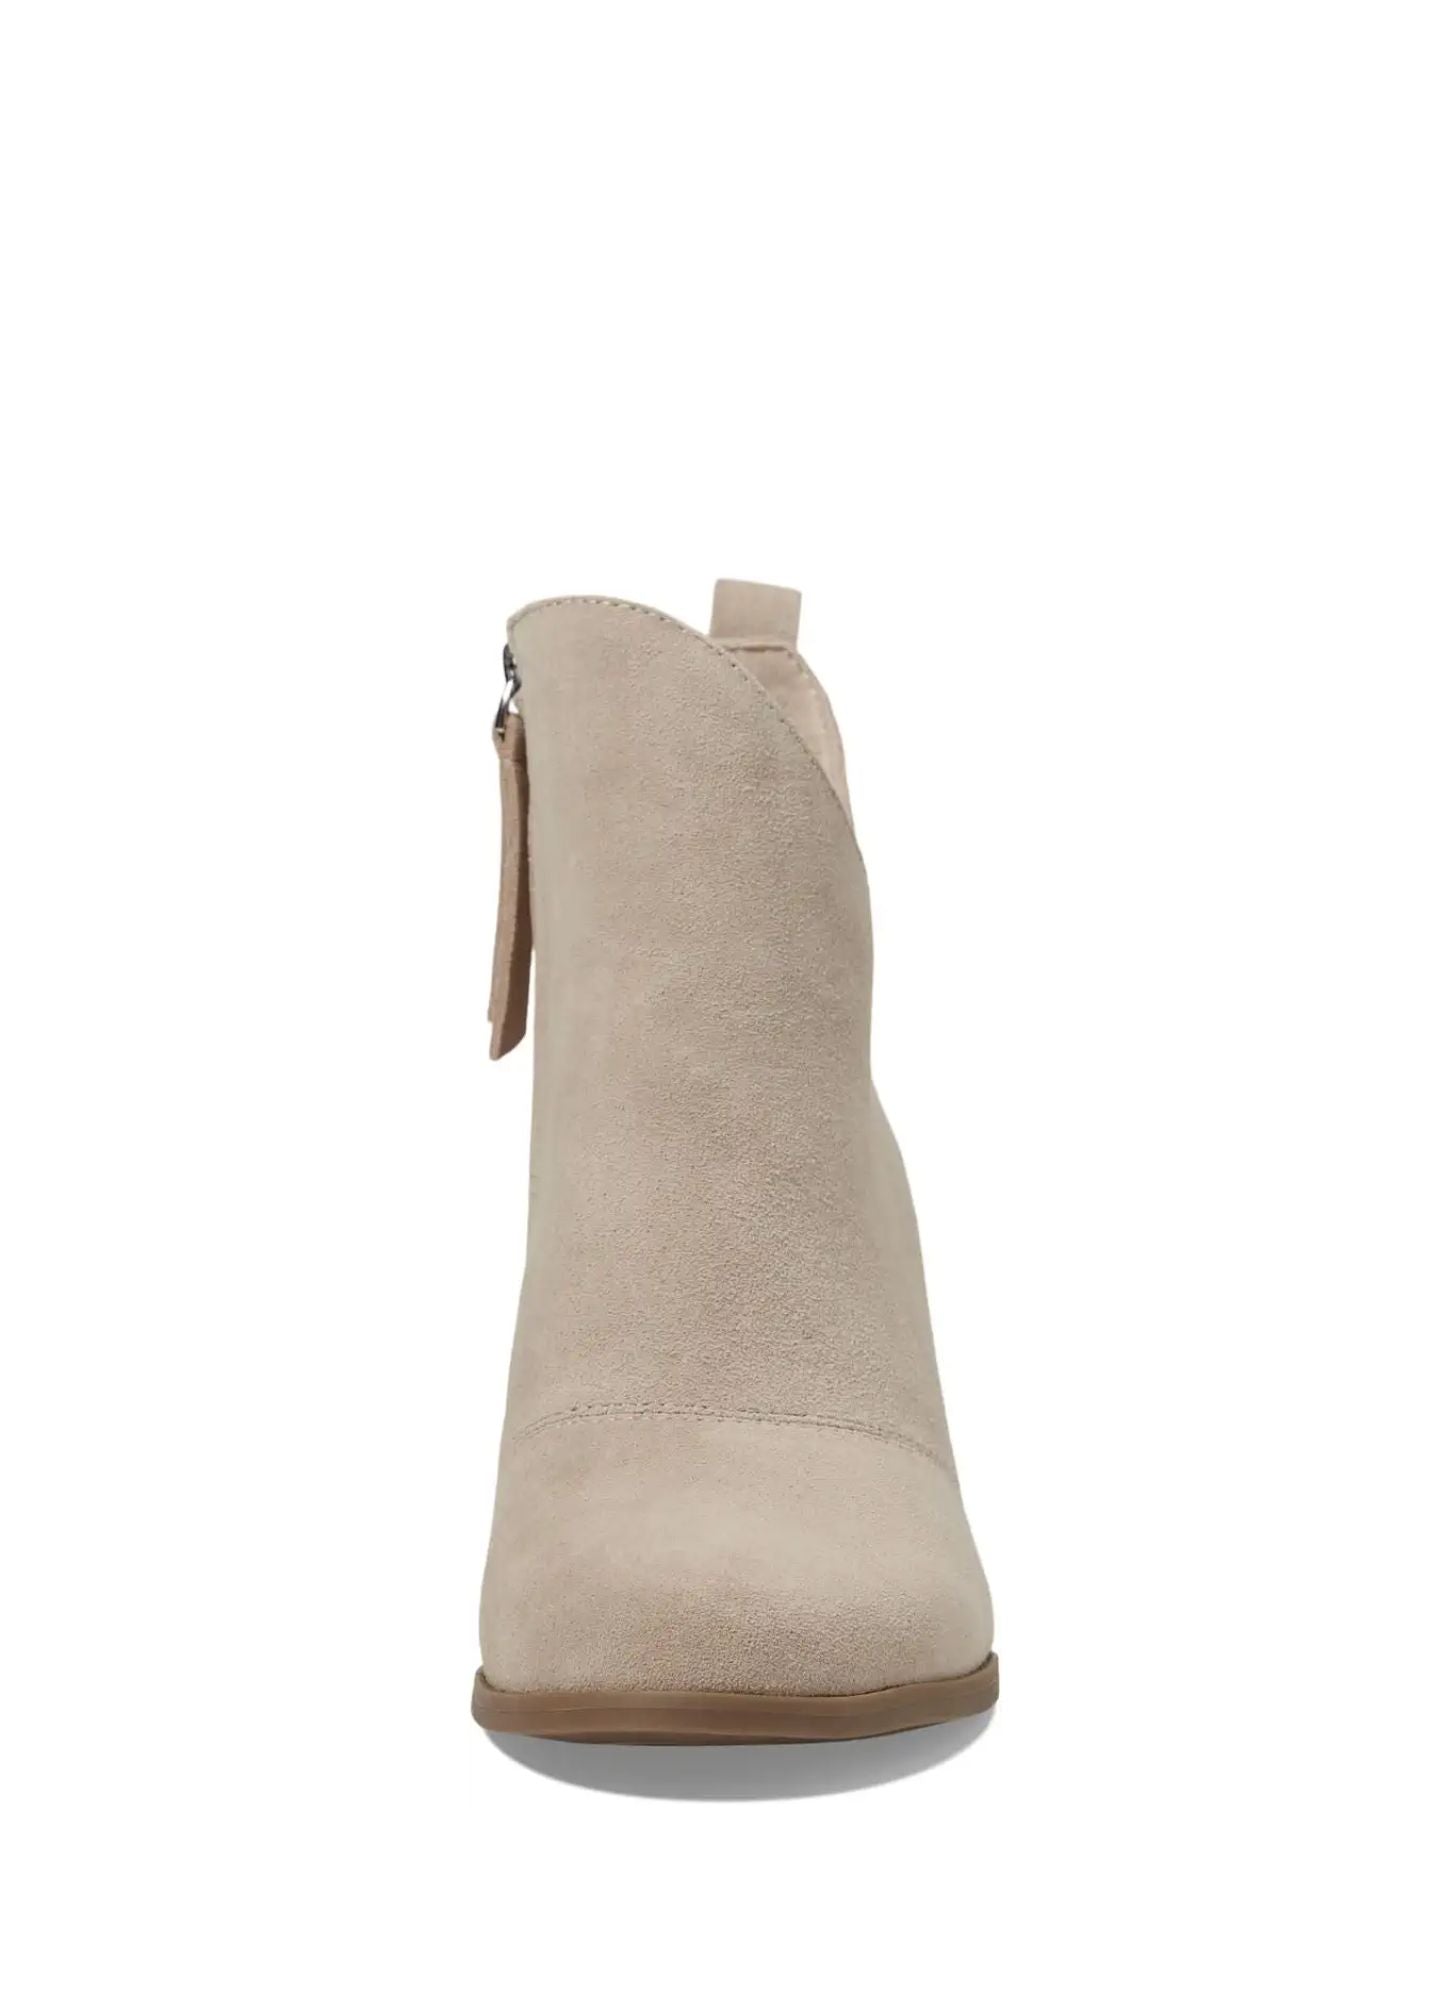 TOMS® Sutton Suede Wedge Boot Shoes